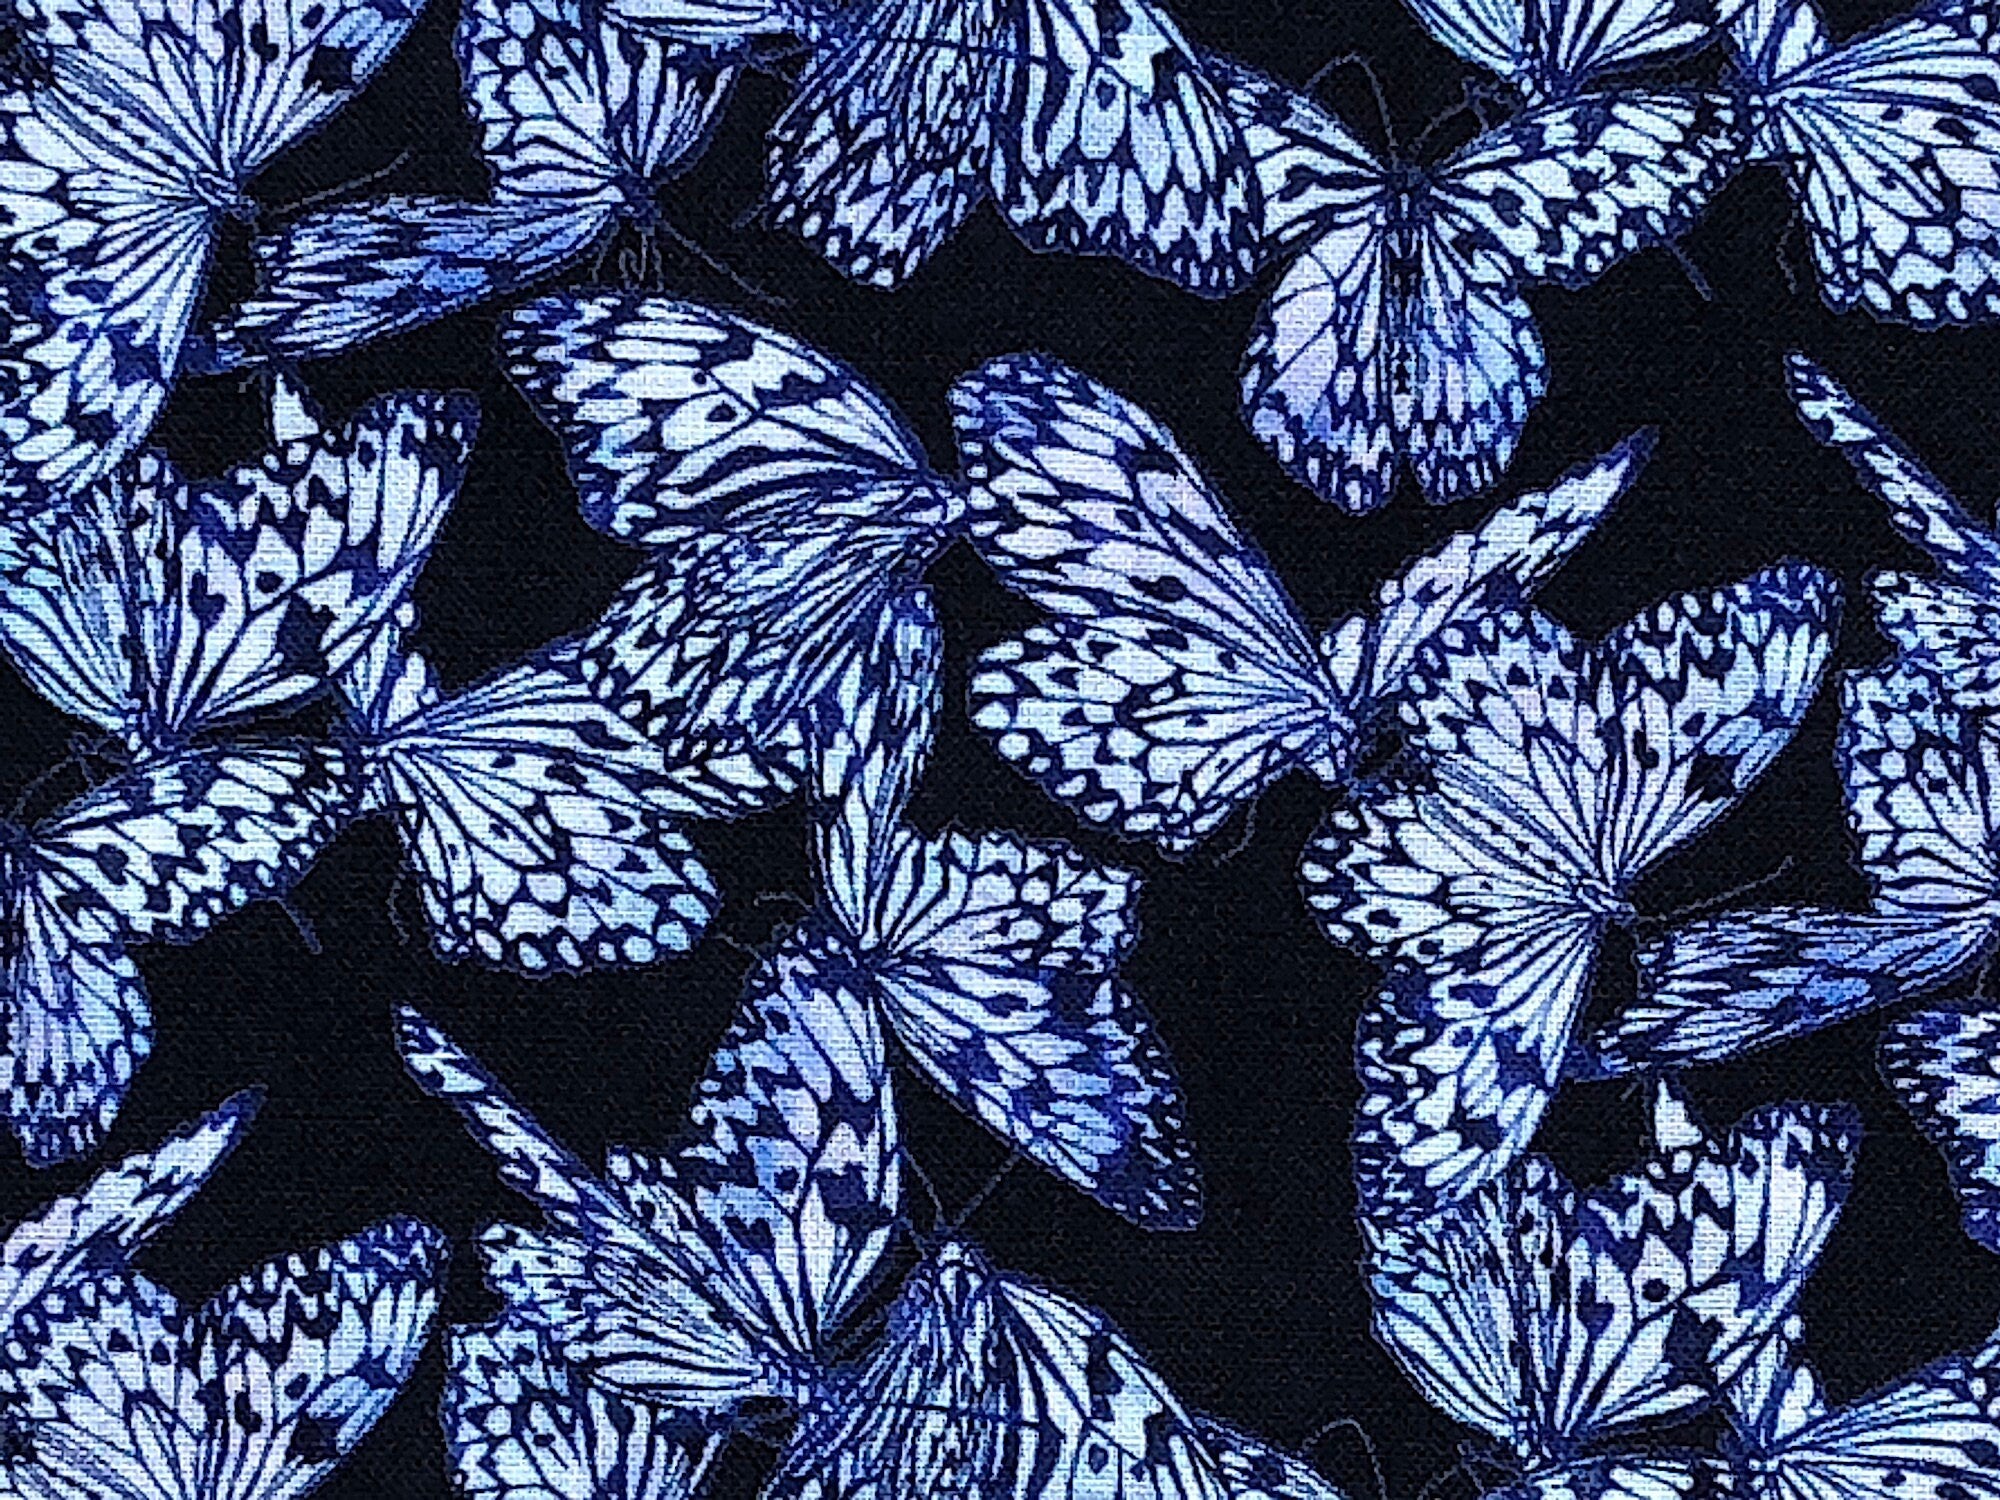 This dark navy fabric is covered with blue and white butterflies